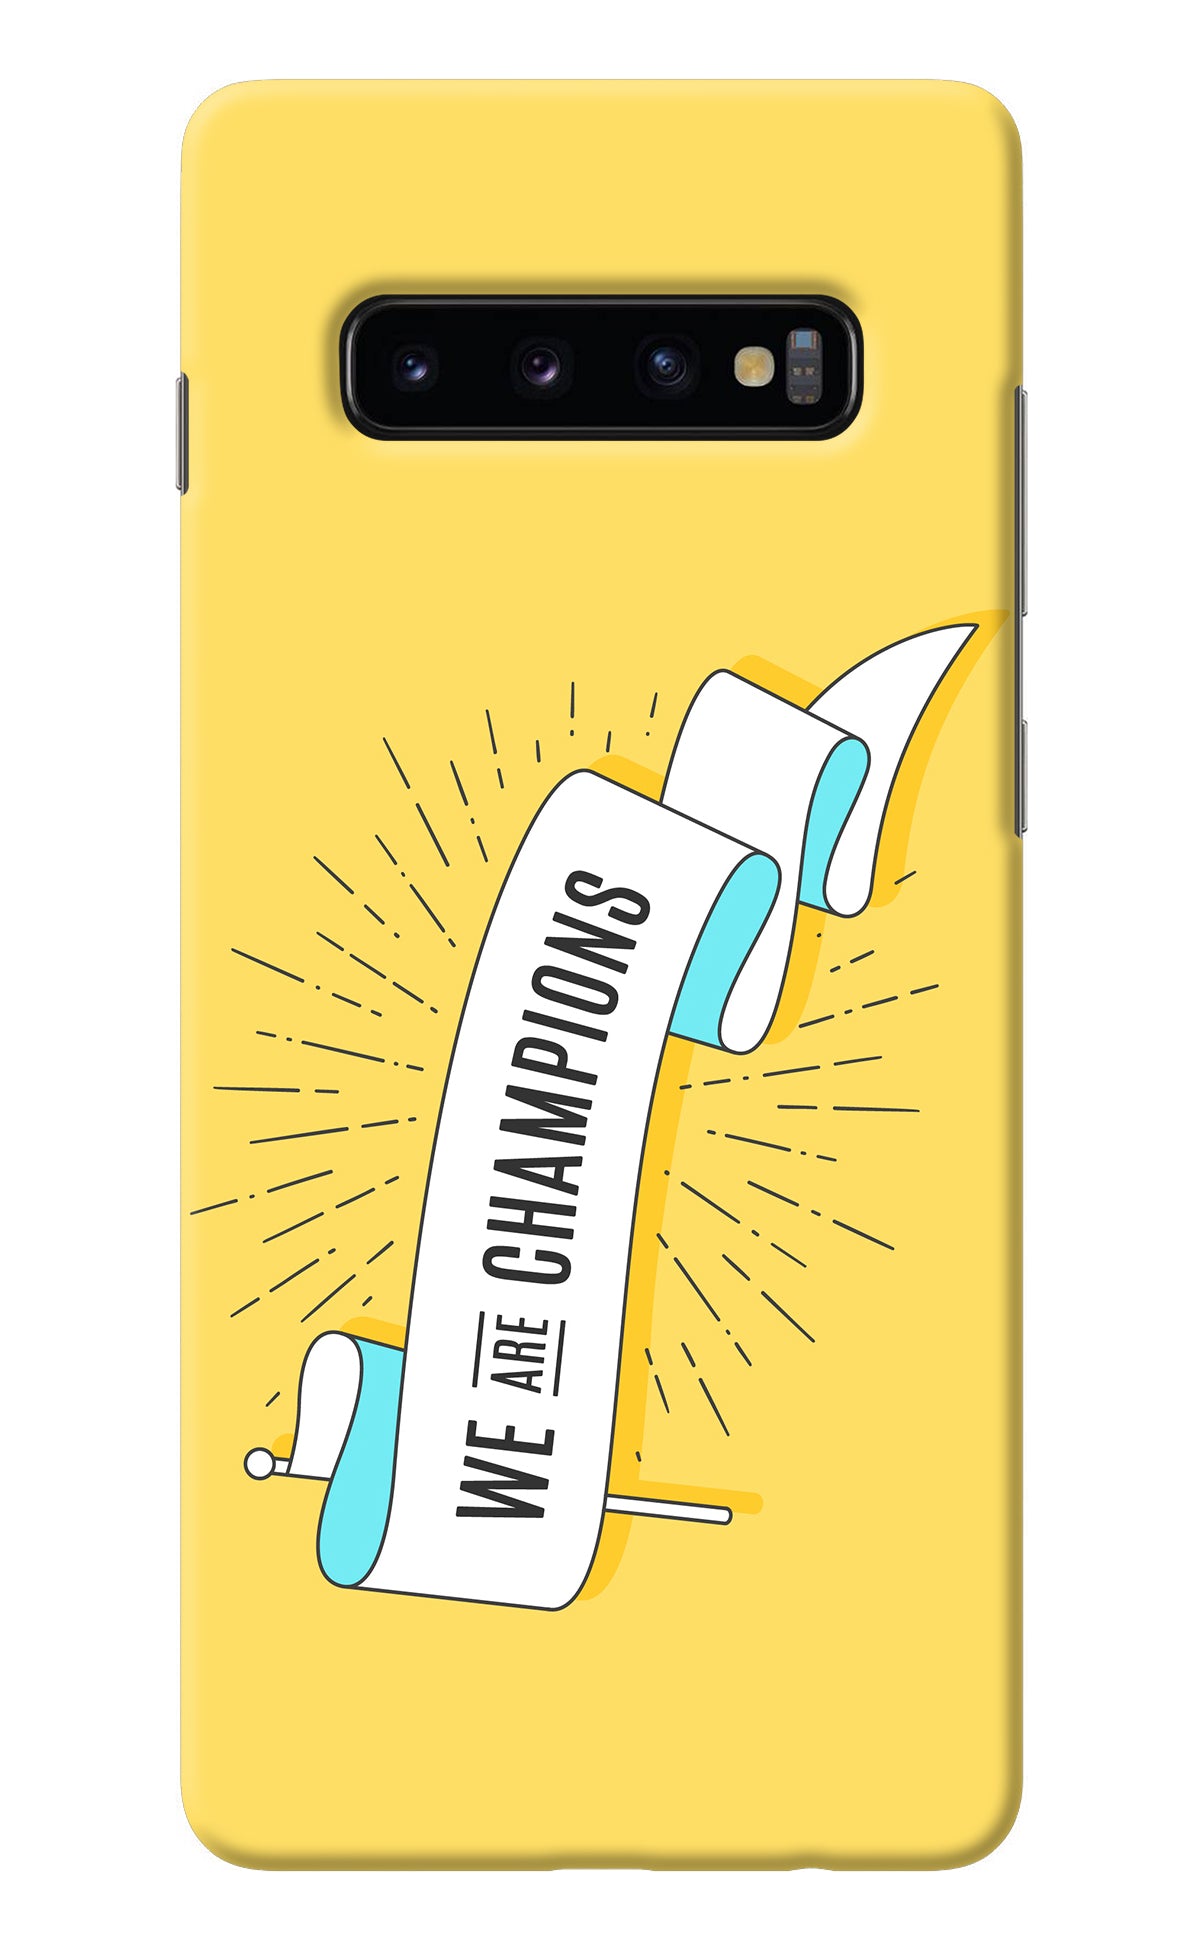 We are Champions Samsung S10 Plus Back Cover